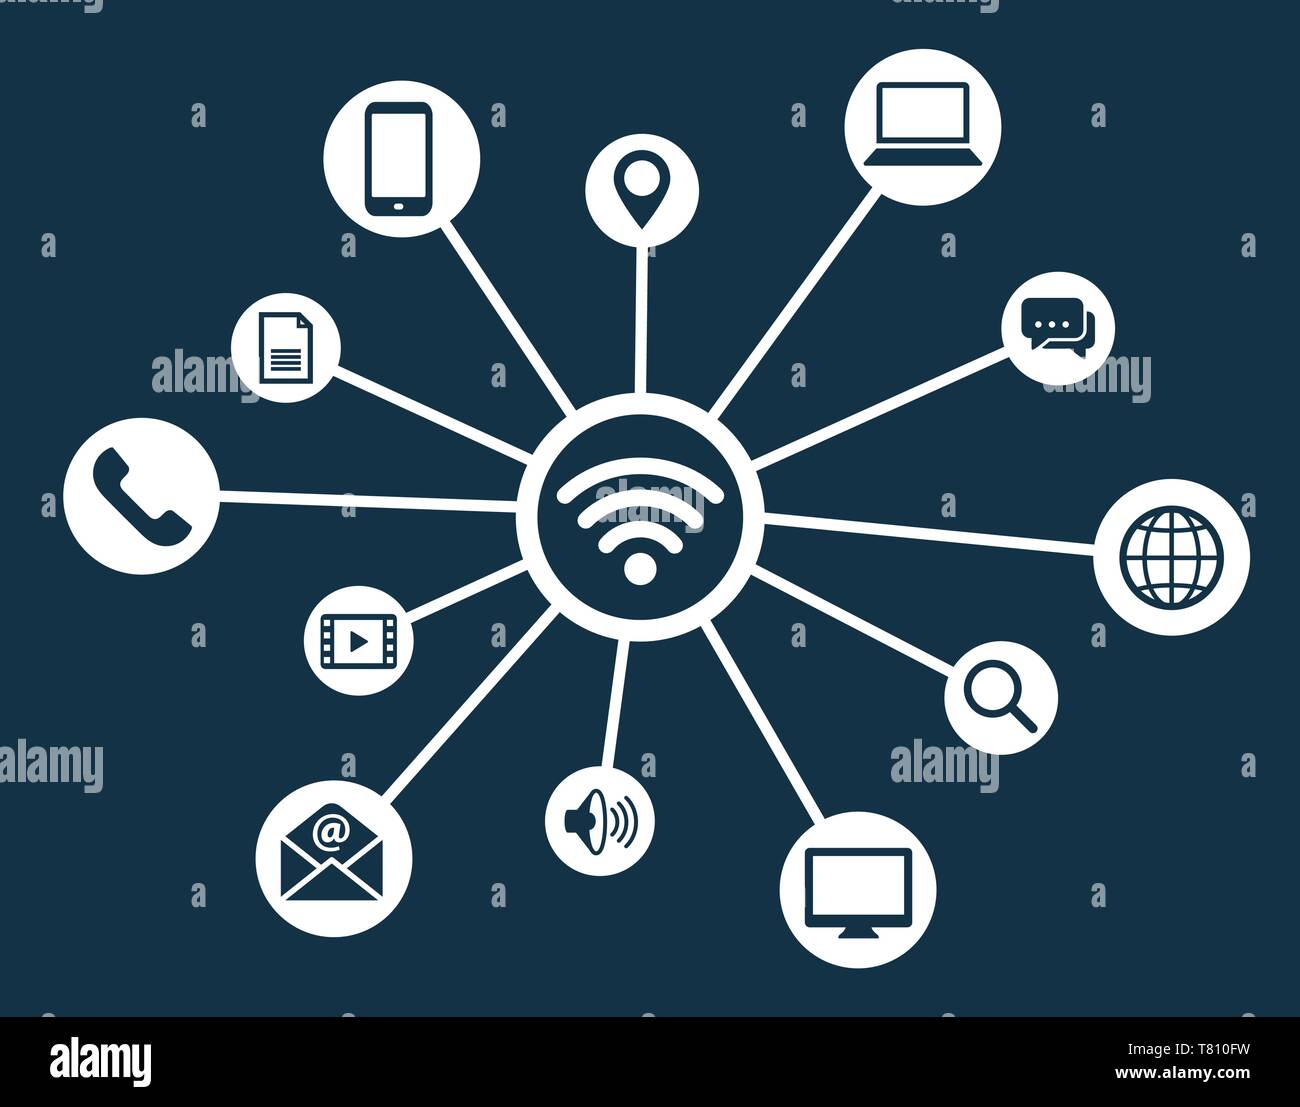 Wifi connections to many devices concept art icon symbol vector illustration Stock Vector